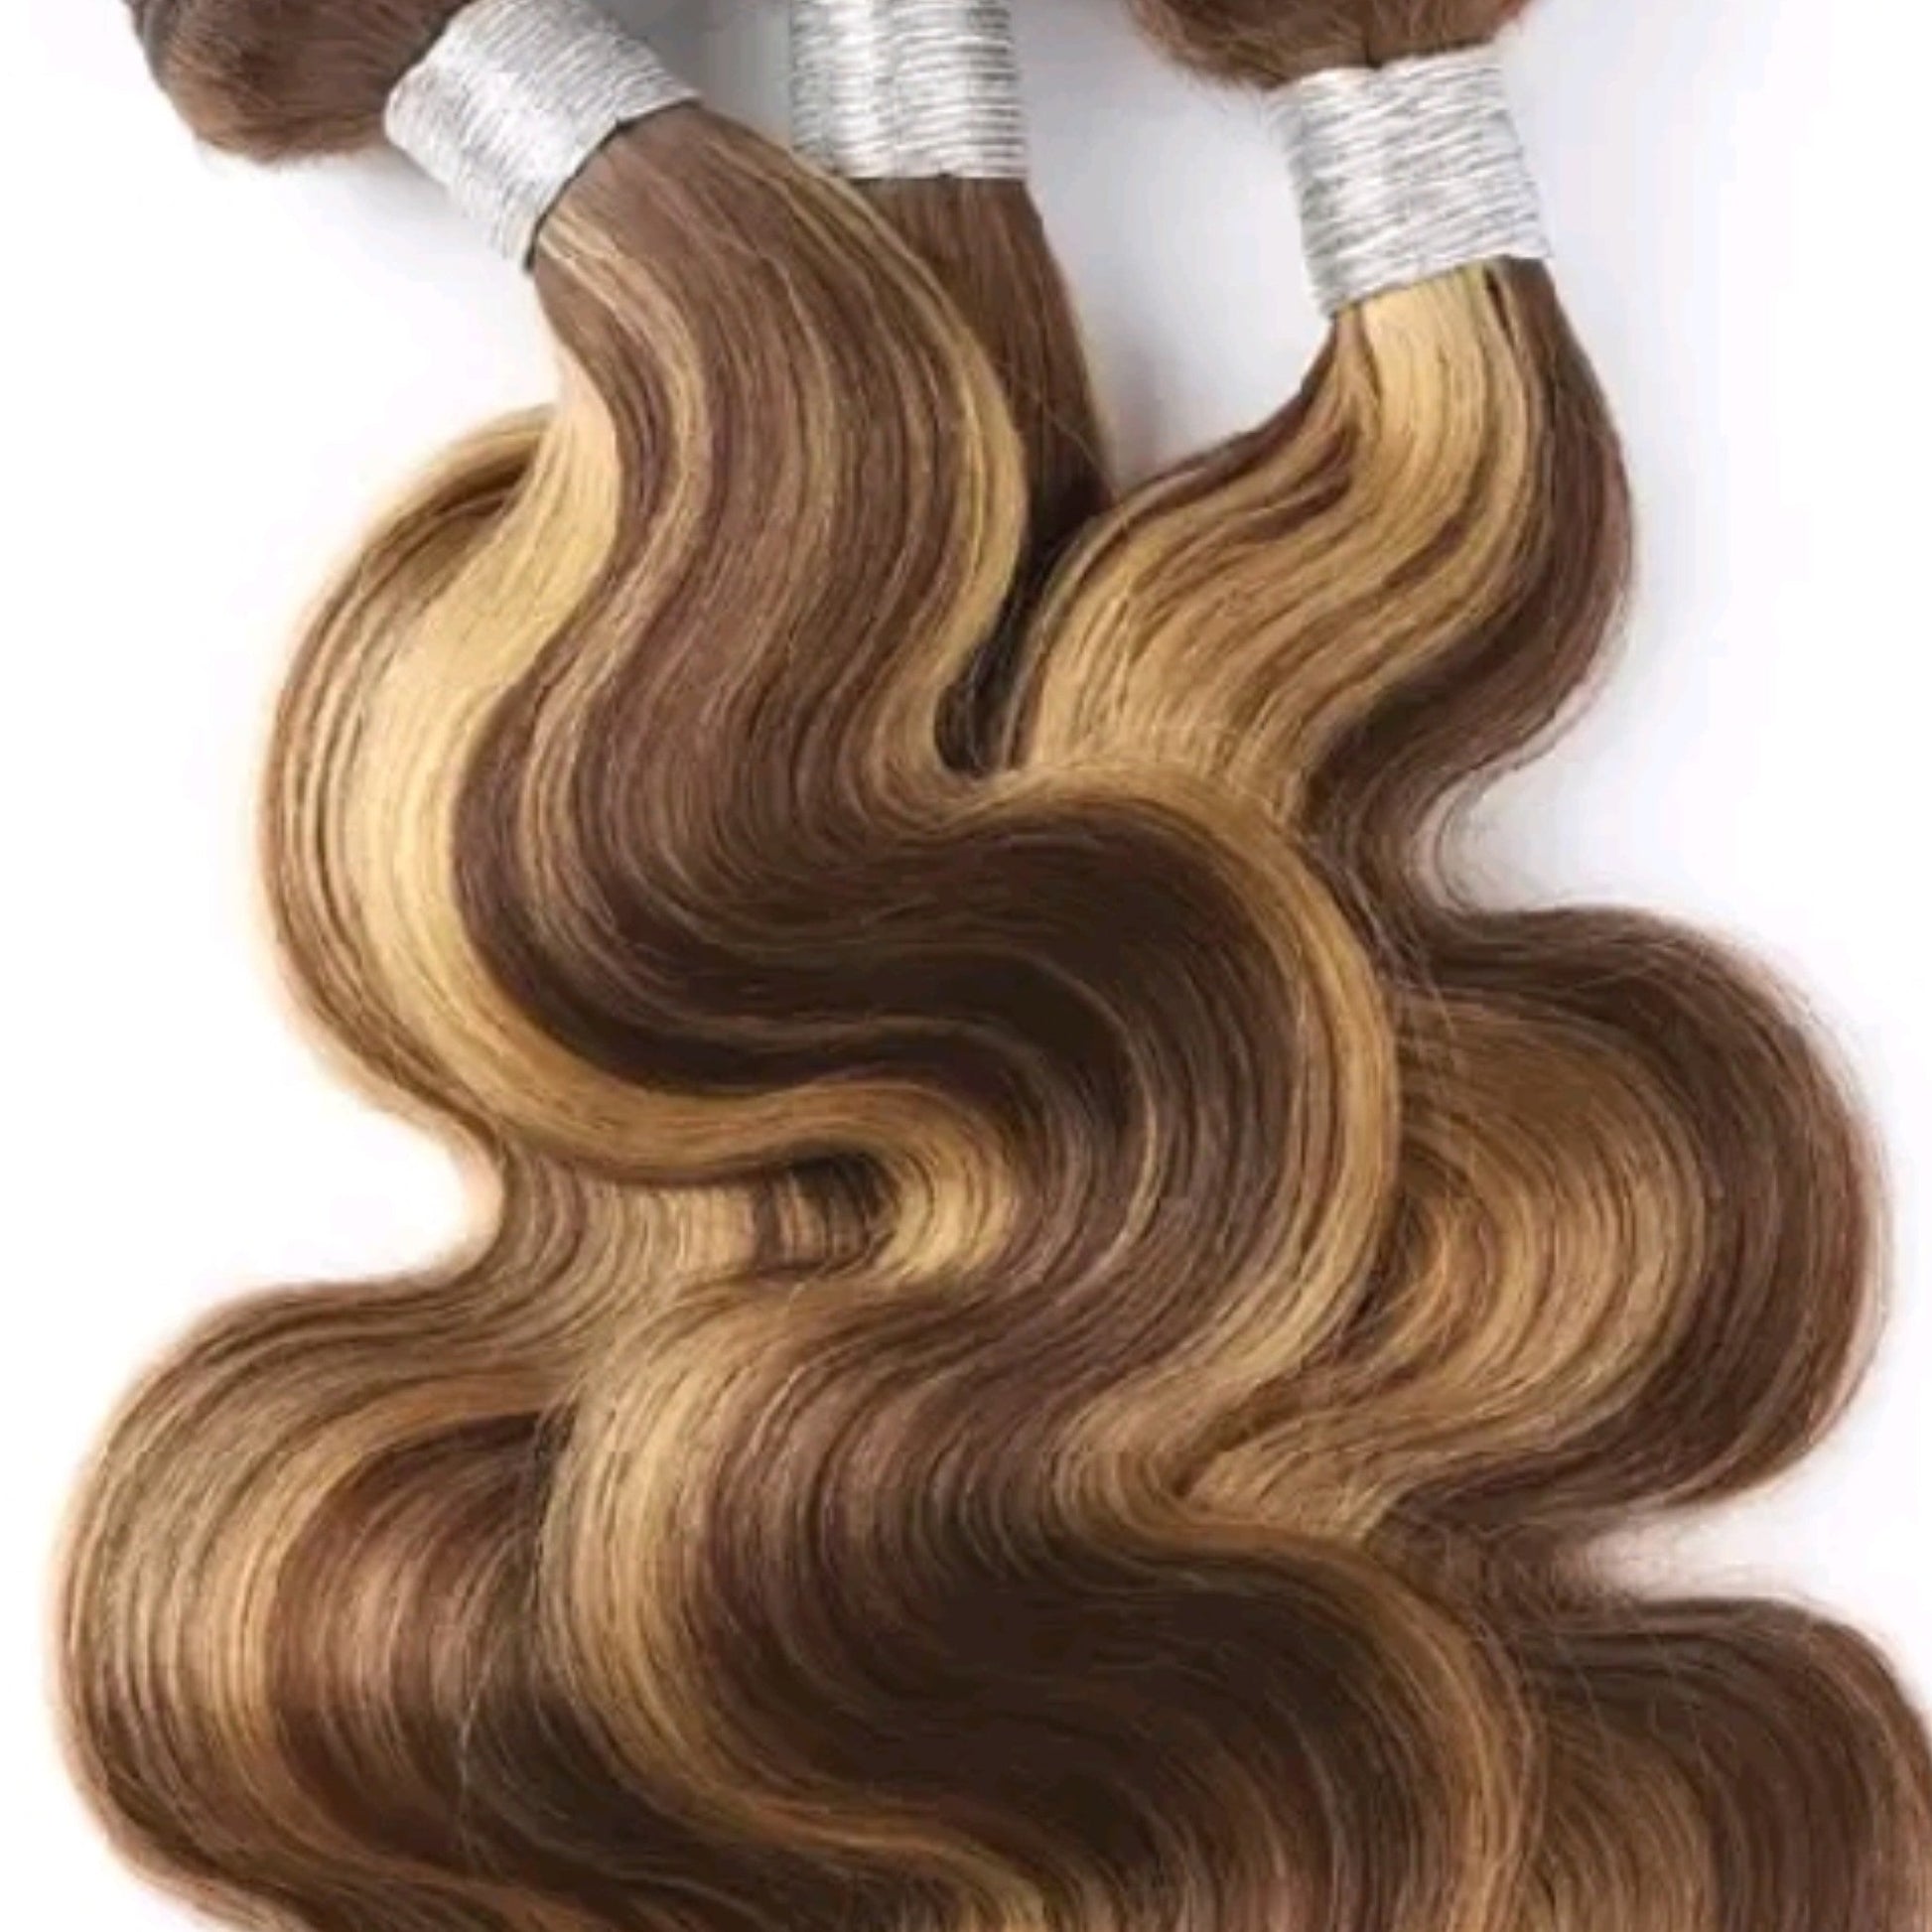 3 Packs Hair Extensions from 12" (30cm) to 24" (60cm) Body Wave Color P4/27Diosa Extensions Haarverlängerungen